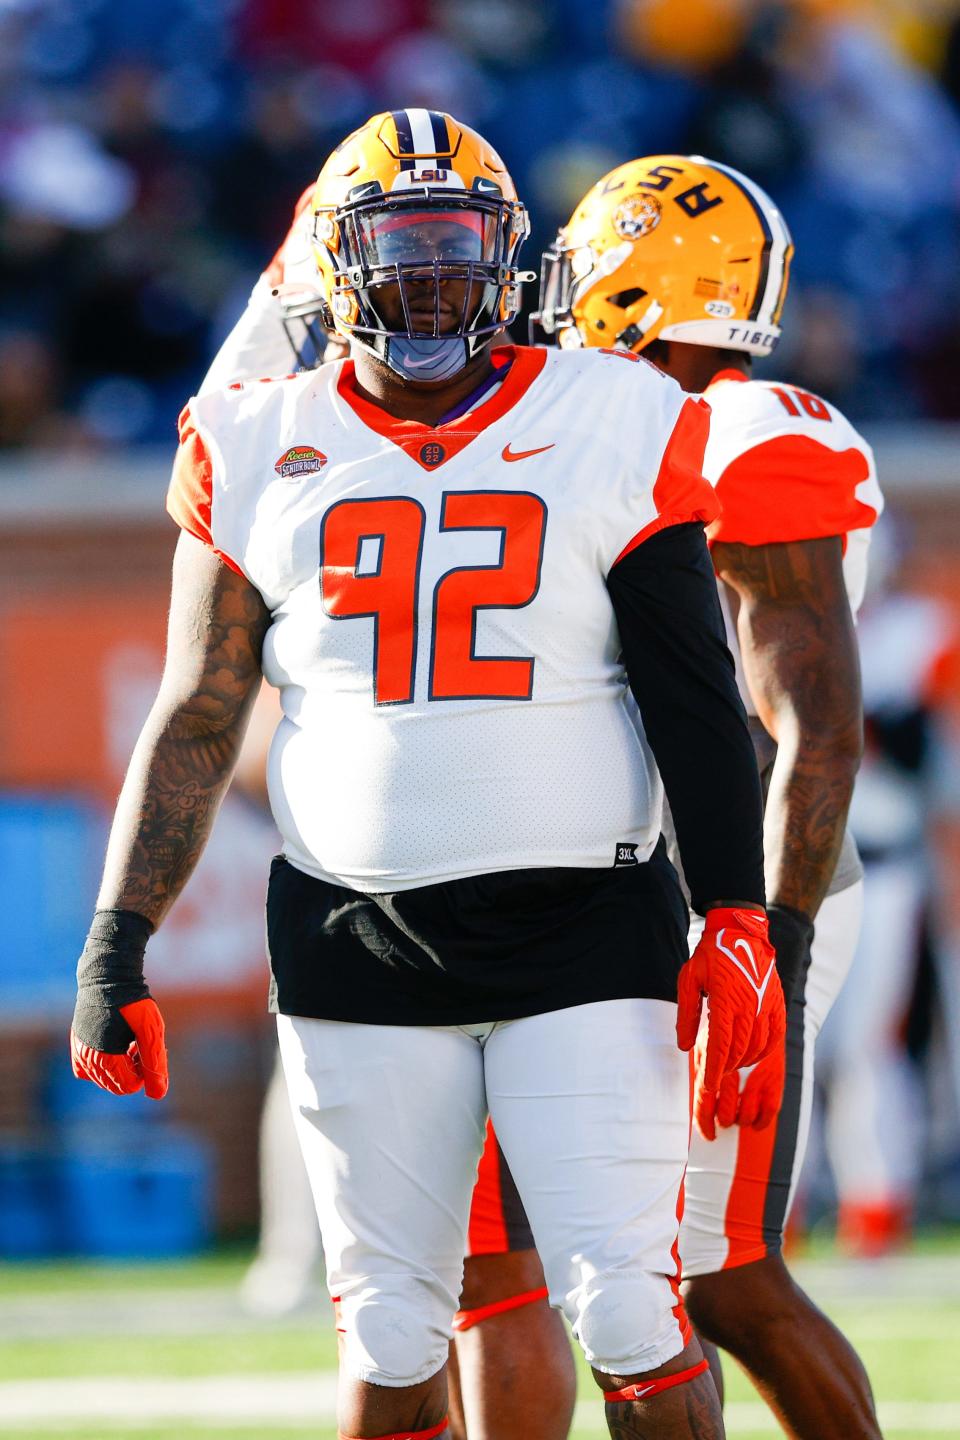 Feb 5, 2022; Mobile, AL, USA;  American squad defensive linemen Neil Farrell Jr. of LSU (92) looks on in the second half against the National squad during the Senior bowl at Hancock Whitney Stadium. Mandatory Credit: Nathan Ray Seebeck-USA TODAY Sports